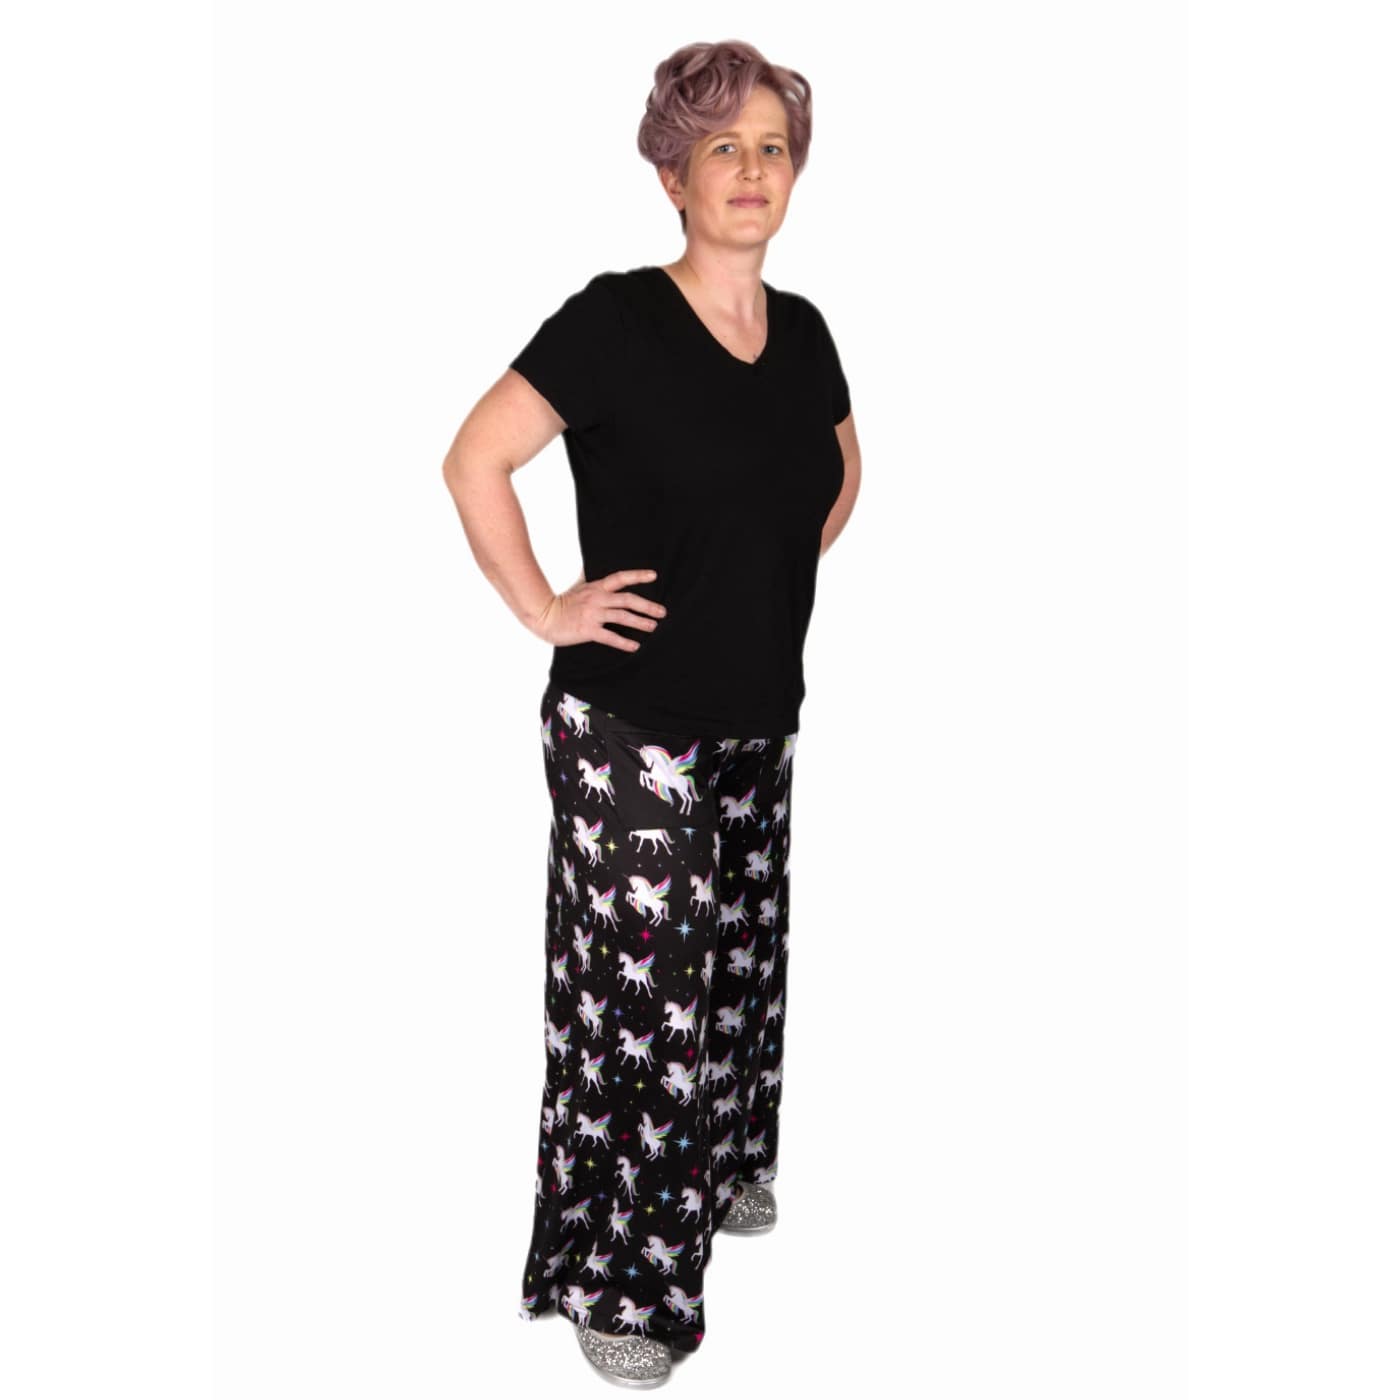 Blessing Wide Leg Pants by RainbowsAndFairies.com.au (Unicorn - Winged Unicorn - Rainbow - Pants With Pockets - Vintage Inspired - Flares) - SKU: CL_WIDEL_BLESS_ORG - Pic-04